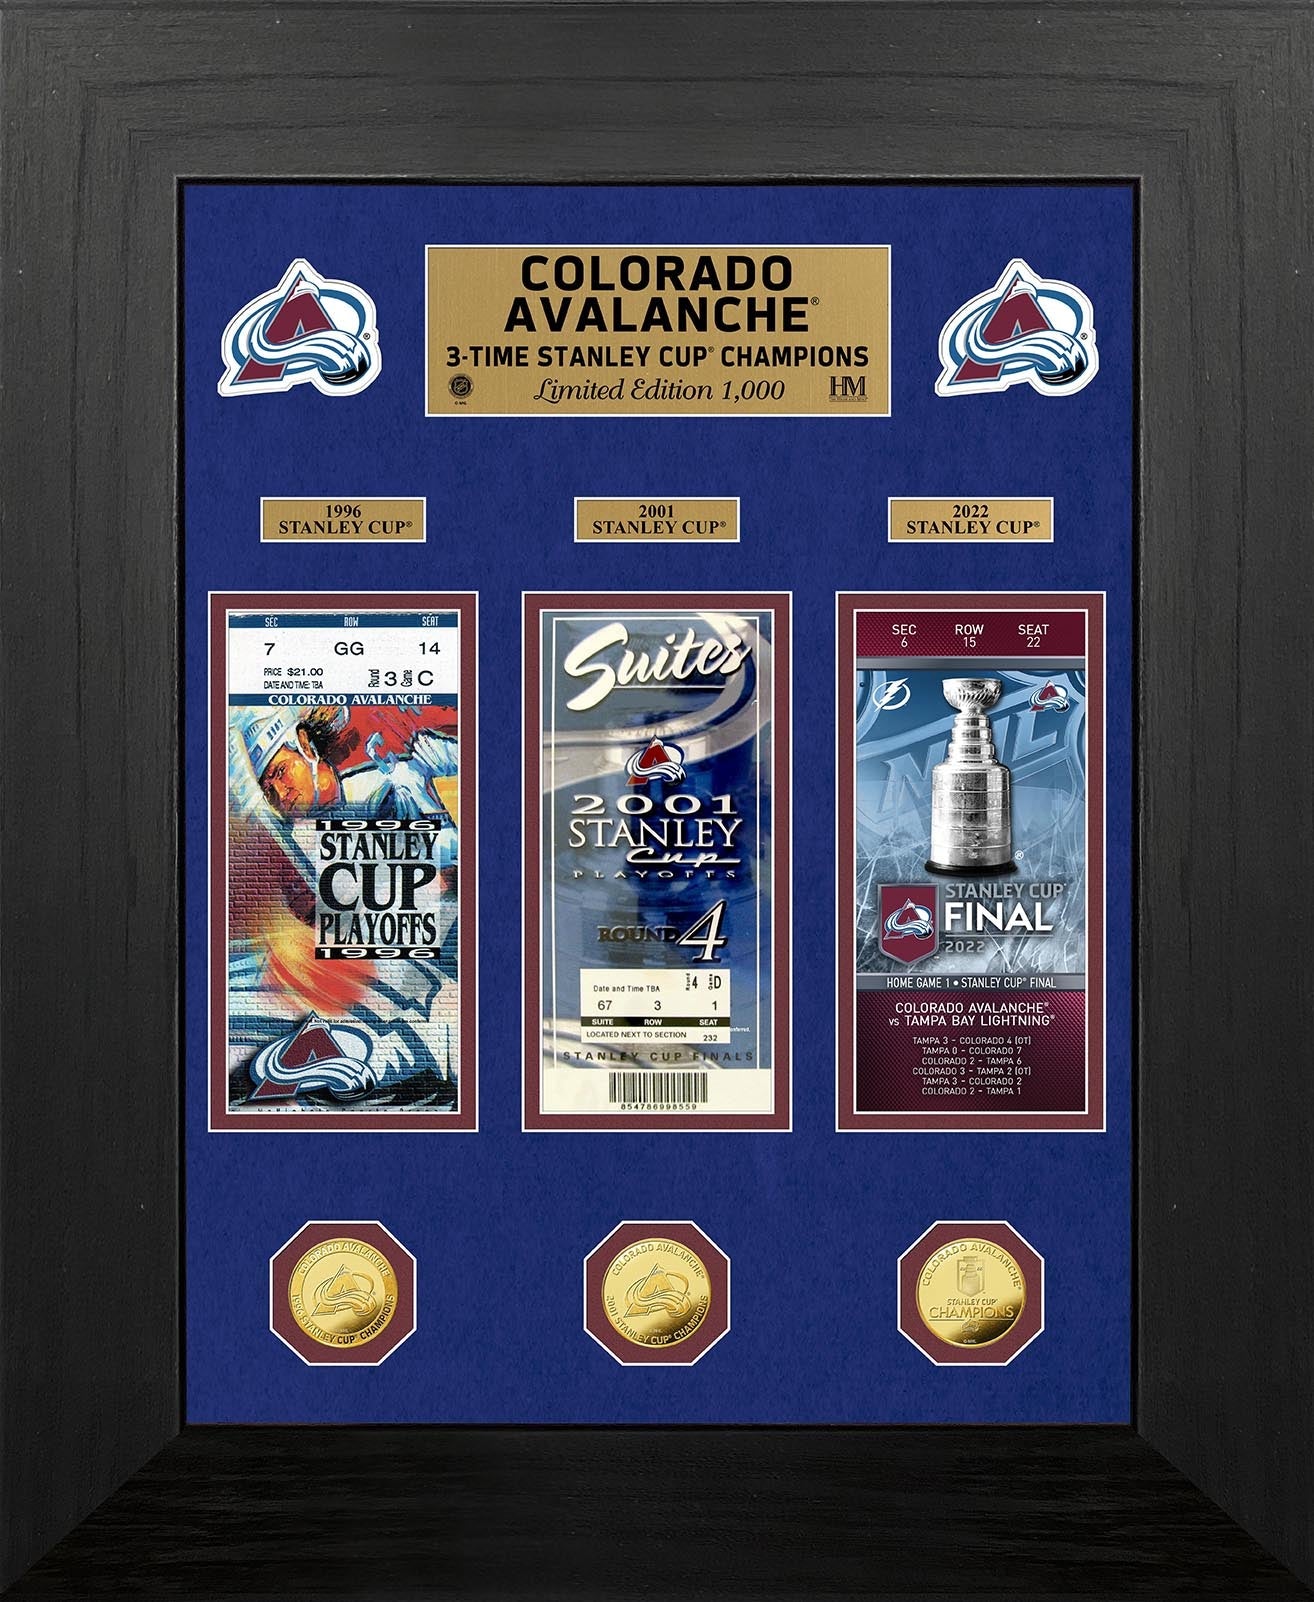 Colorado Avalanche 3x Stanley Cup Champions Deluxe Gold Coin & Ticket Collection